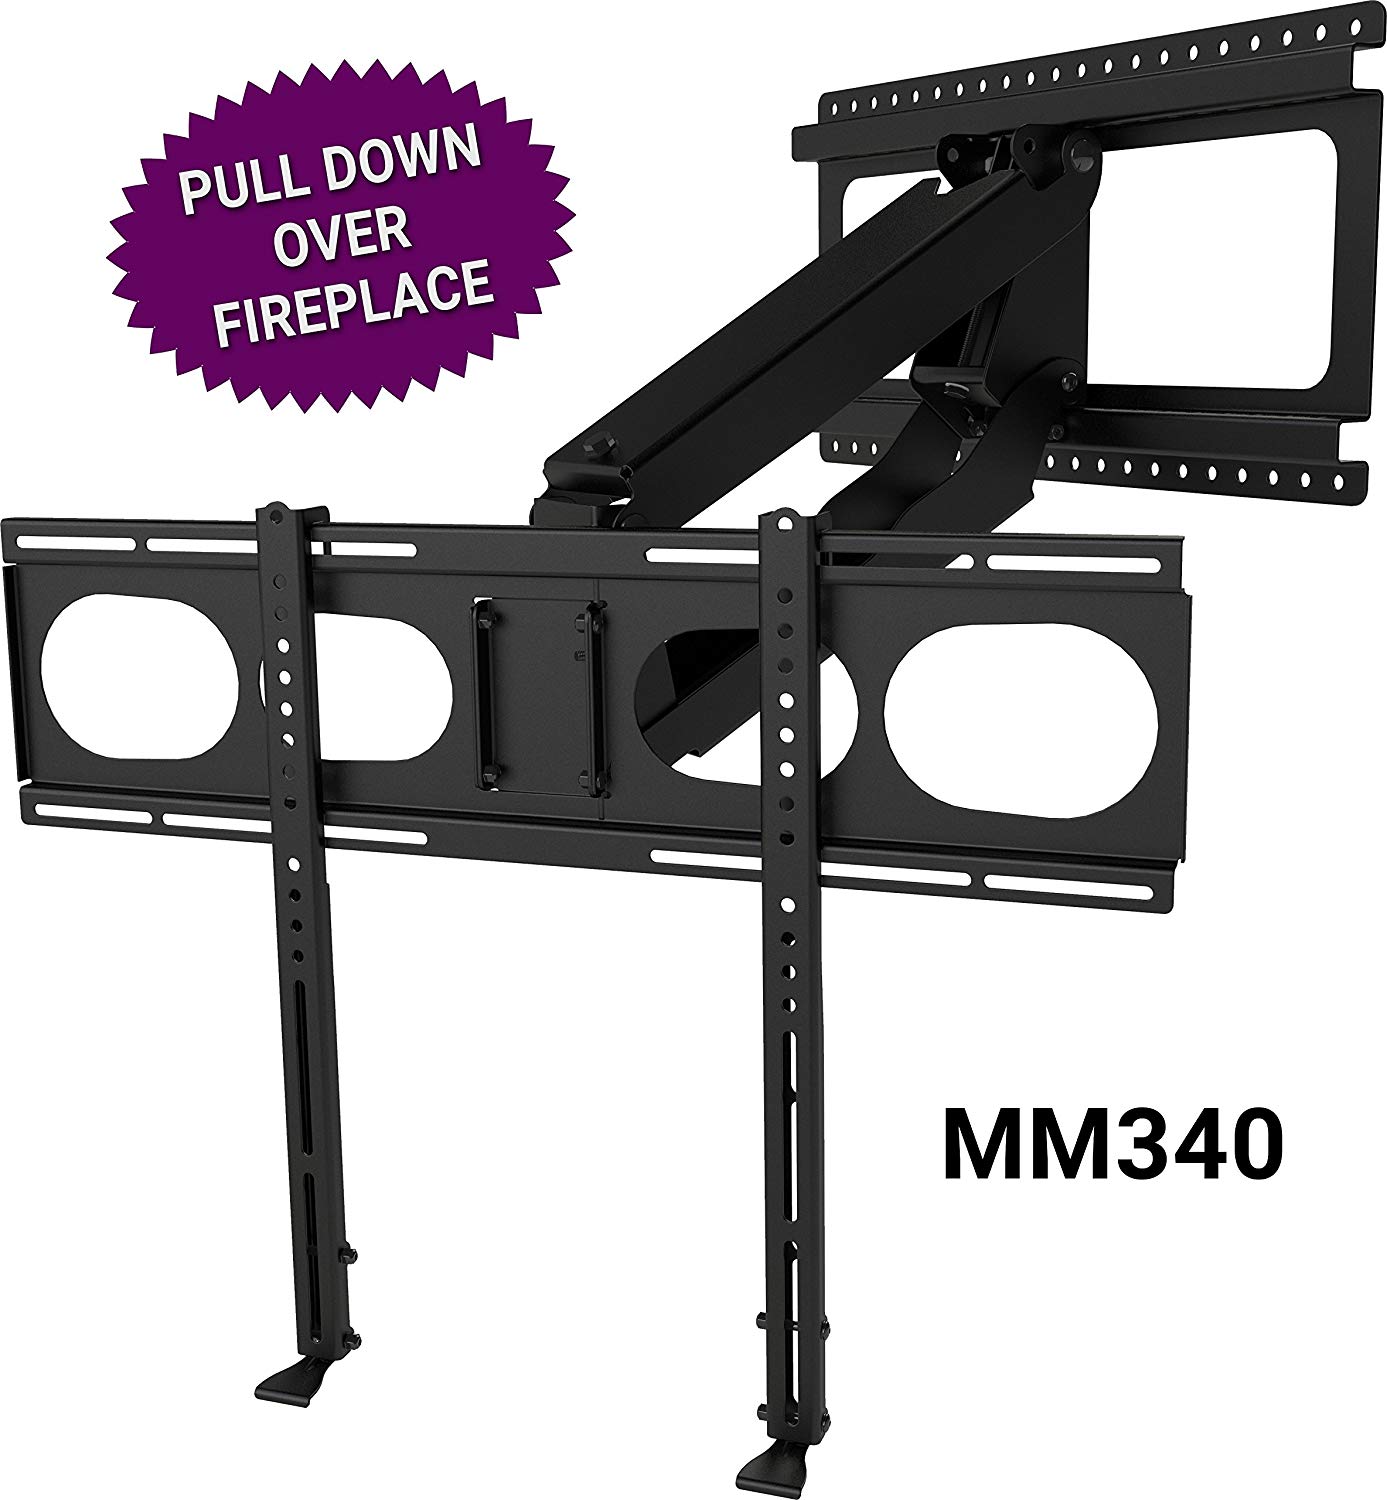 Fireplace Mantels with Tv Above Fresh Mantelmount Mm340 Fireplace Pull Down Tv Mount